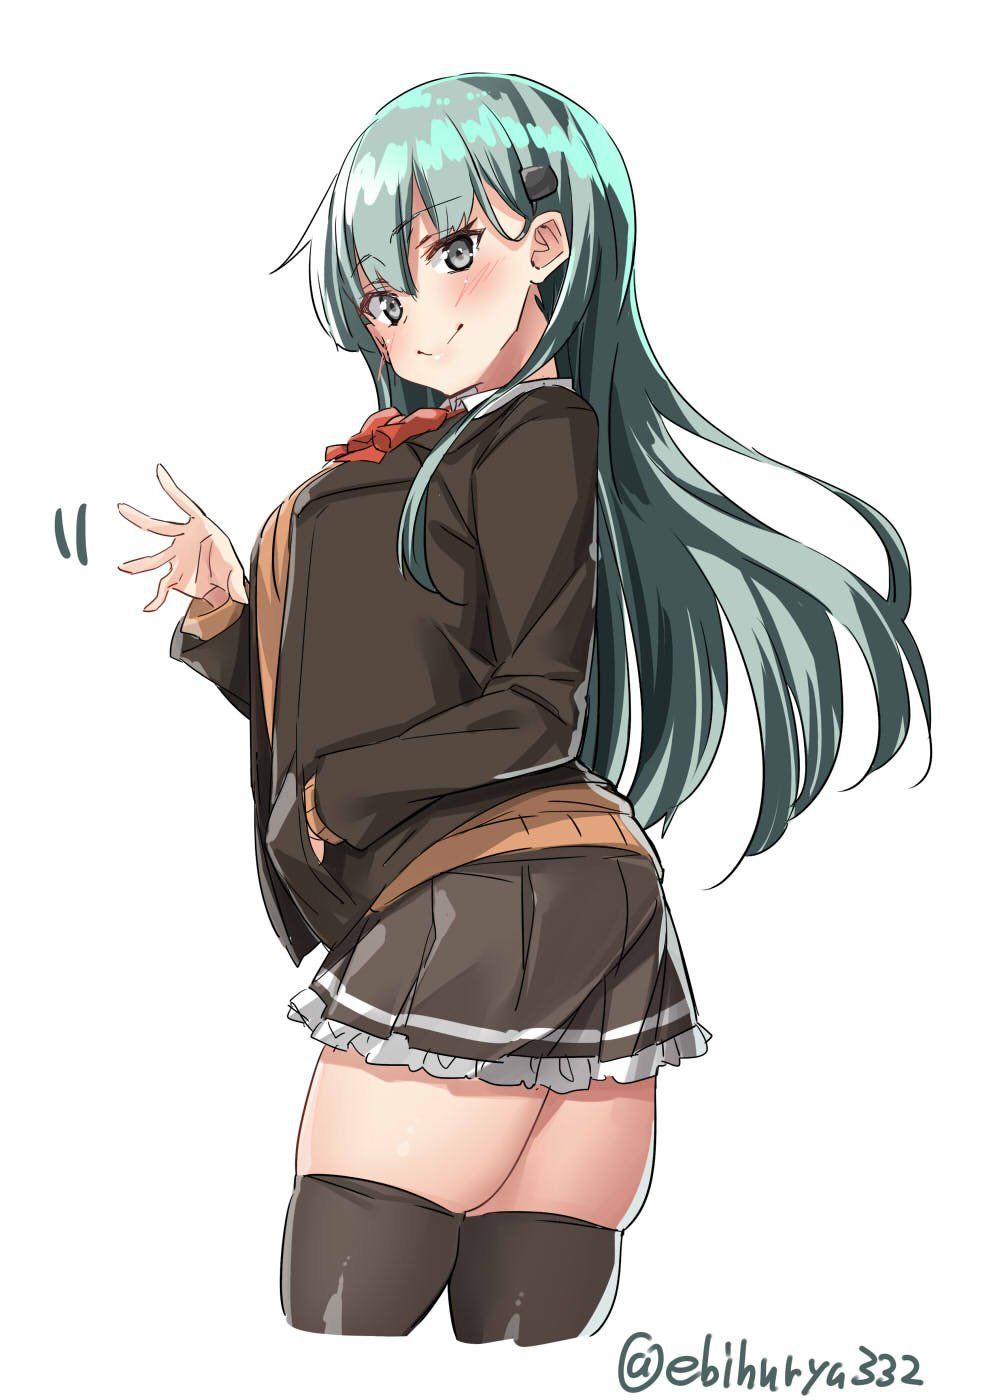 [Secondary ZIP] image of the thighhighs girl showing annoying thigh 22